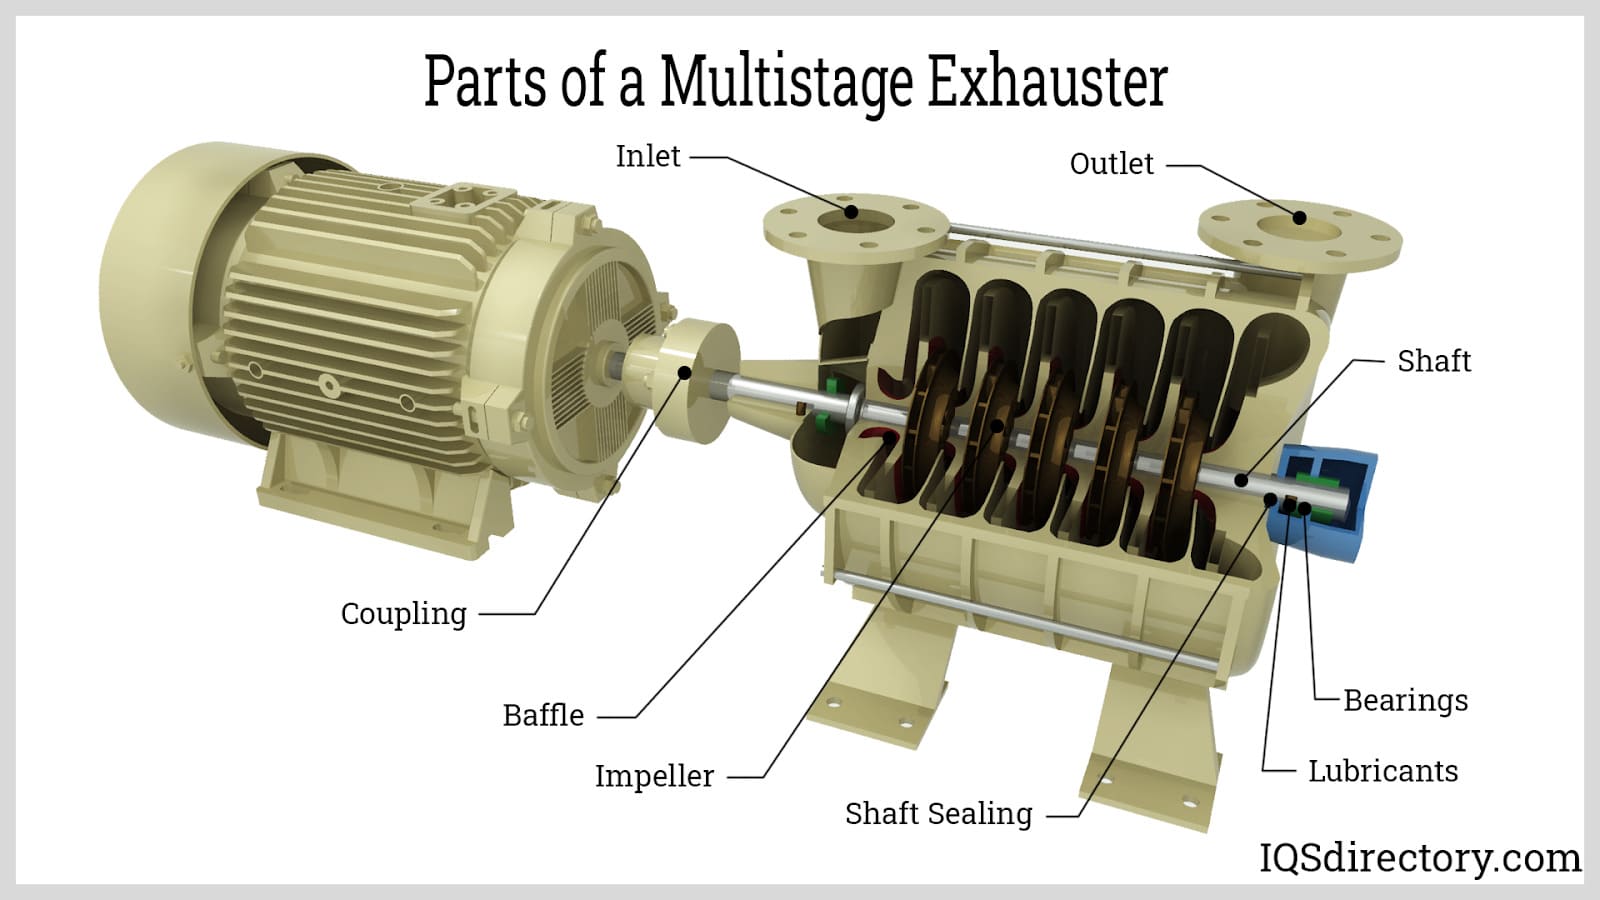 Parts of a Multistage Exhauster